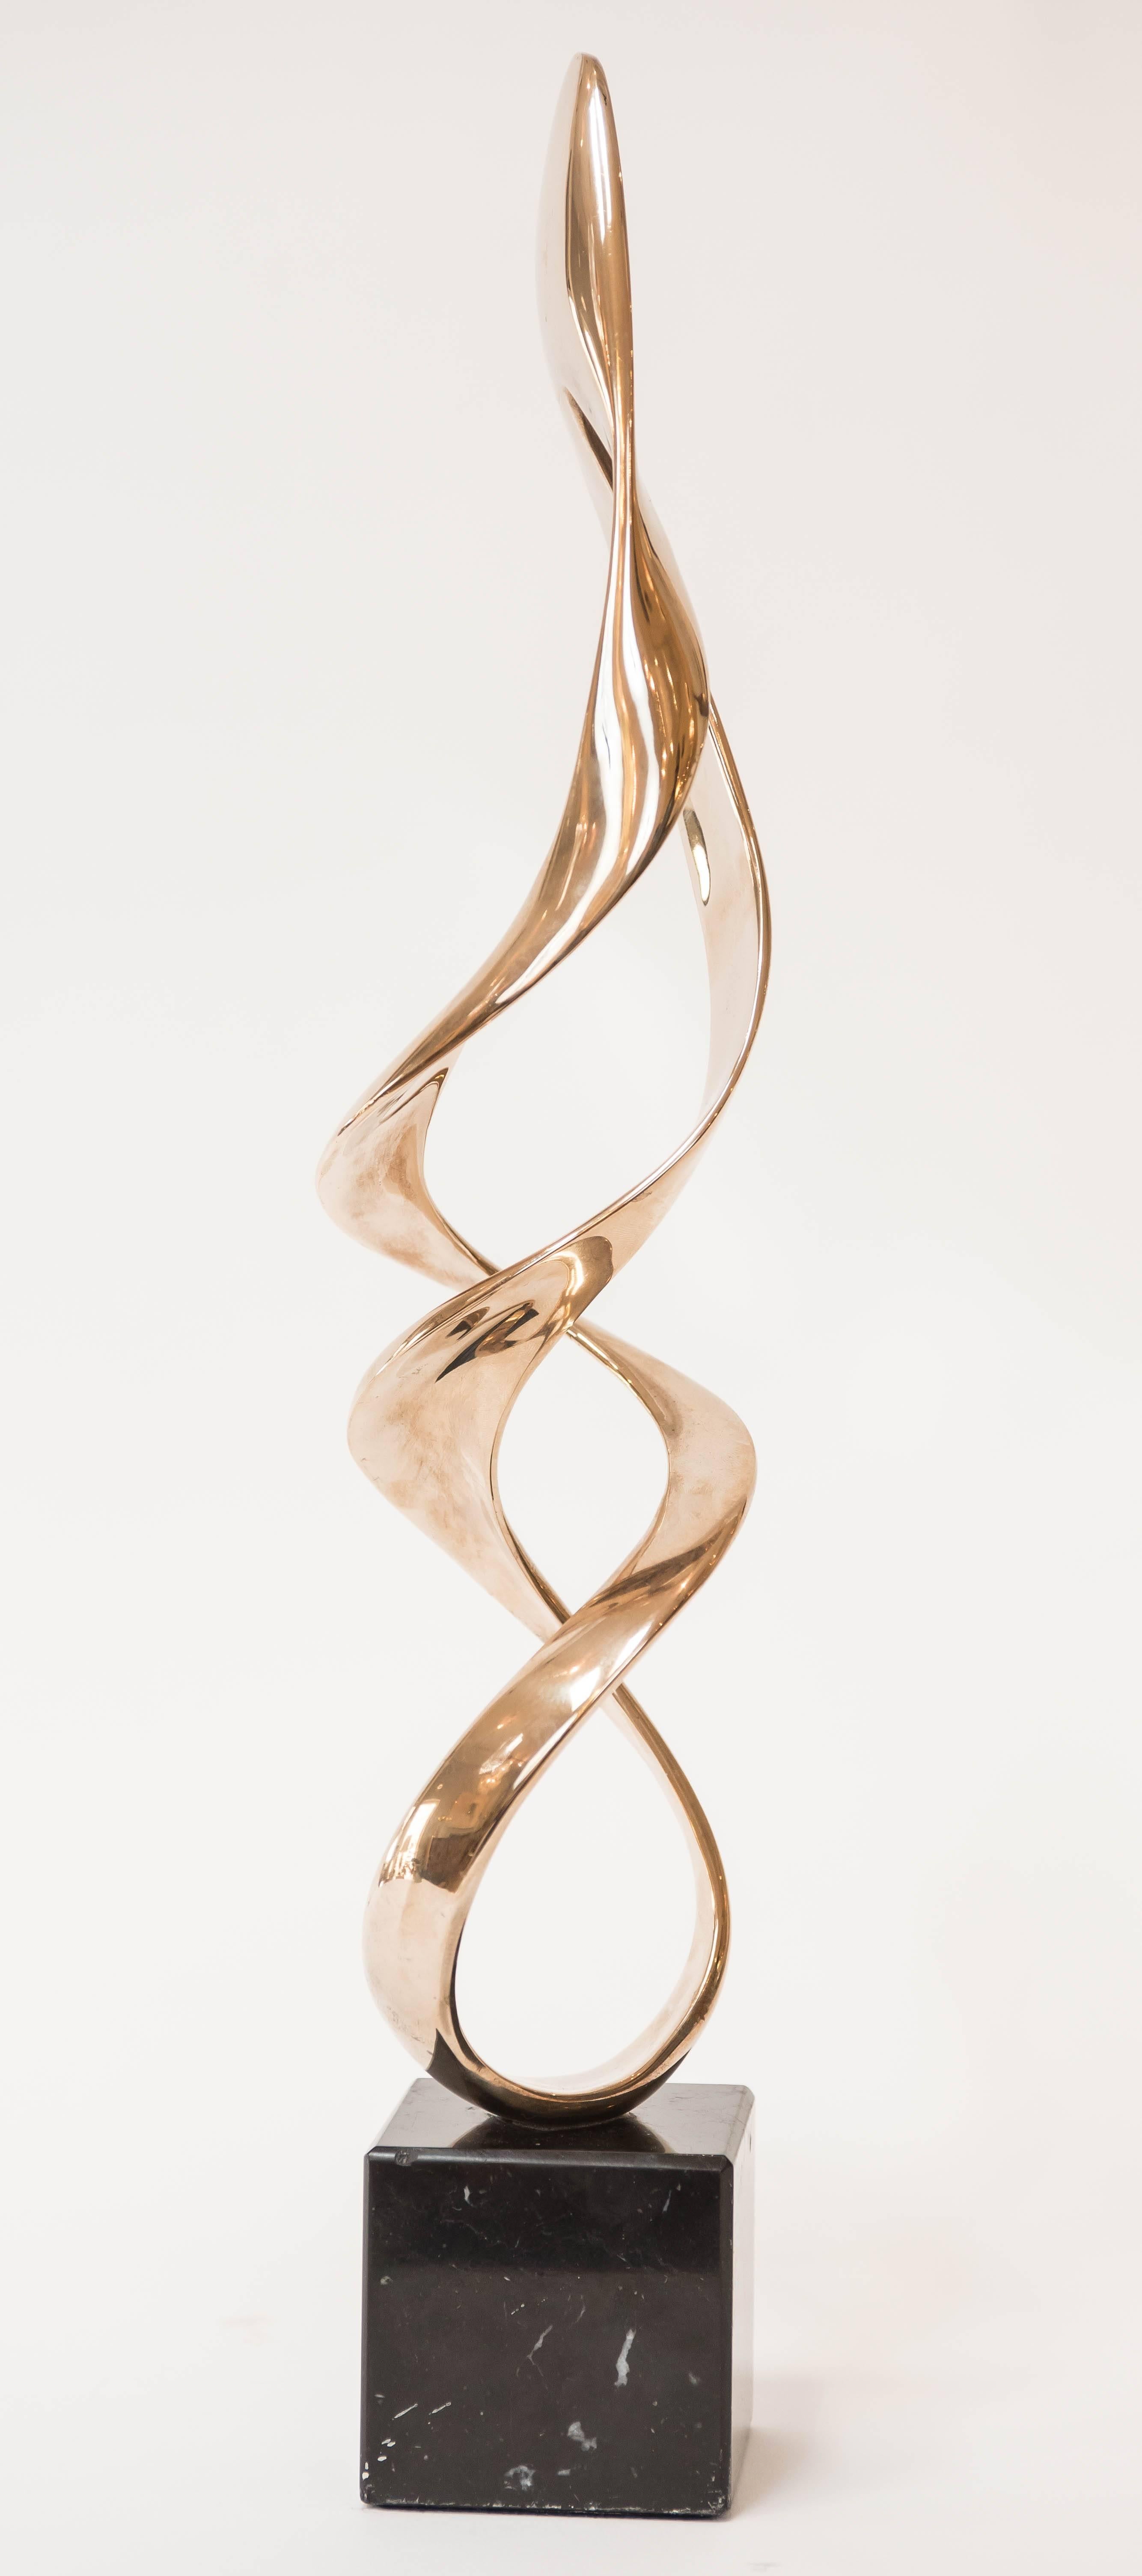 American Polished Bronze Sculpture by Tom Bennett, USA, 1987